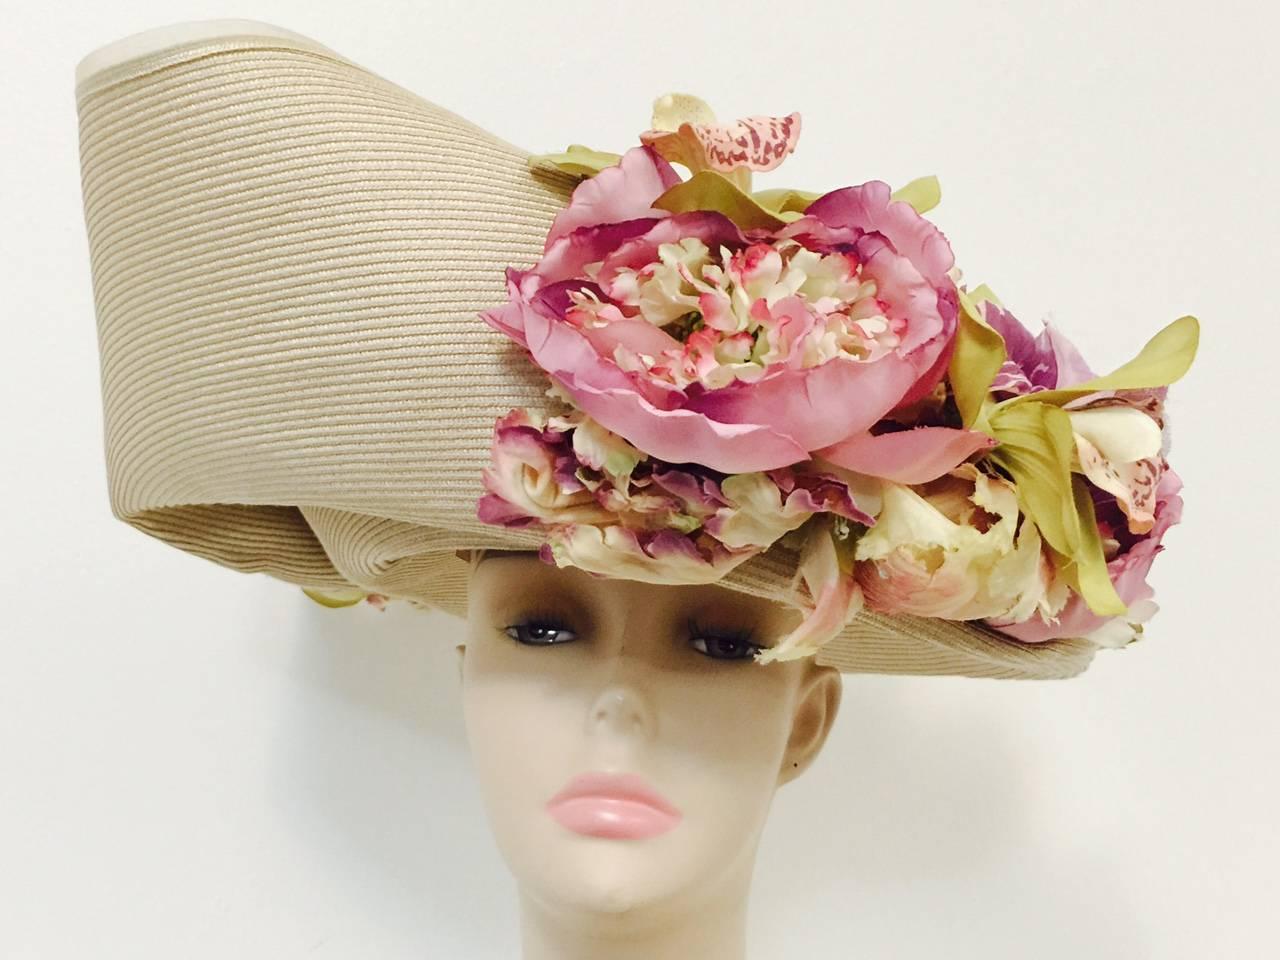 Eric Javits Custom Hat Worn at The Ascot Races was designed with the Ascot in mind!  Worthy of a British Royal, hat features upturned wide brim with custom folds and luscious lillys in full bloom!  Signed by the star milliner himself!  Is it